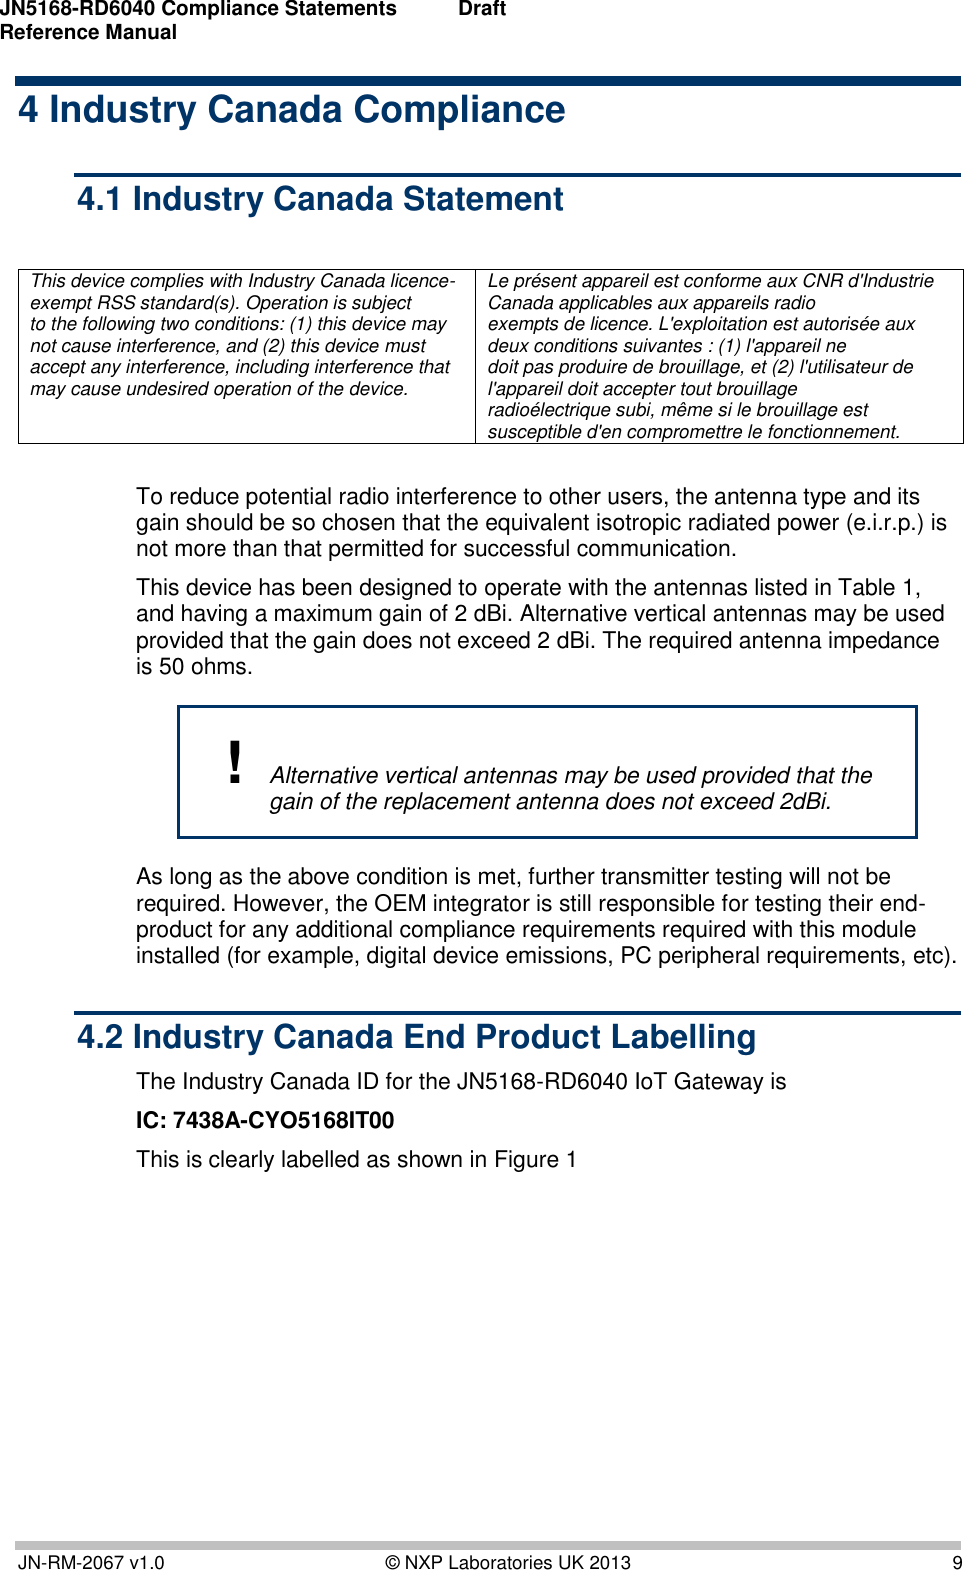 JN5168-RD6040 Compliance Statements Reference Manual   Draft   JN-RM-2067 v1.0  © NXP Laboratories UK 2013  9 4 Industry Canada Compliance 4.1 Industry Canada Statement  This device complies with Industry Canada licence-exempt RSS standard(s). Operation is subject  to the following two conditions: (1) this device may not cause interference, and (2) this device must accept any interference, including interference that may cause undesired operation of the device. Le présent appareil est conforme aux CNR d&apos;Industrie Canada applicables aux appareils radio exempts de licence. L&apos;exploitation est autorisée aux deux conditions suivantes : (1) l&apos;appareil ne doit pas produire de brouillage, et (2) l&apos;utilisateur de l&apos;appareil doit accepter tout brouillage radioélectrique subi, même si le brouillage est susceptible d&apos;en compromettre le fonctionnement.  To reduce potential radio interference to other users, the antenna type and its gain should be so chosen that the equivalent isotropic radiated power (e.i.r.p.) is not more than that permitted for successful communication.  This device has been designed to operate with the antennas listed in Table 1, and having a maximum gain of 2 dBi. Alternative vertical antennas may be used provided that the gain does not exceed 2 dBi. The required antenna impedance is 50 ohms. ! Alternative vertical antennas may be used provided that the gain of the replacement antenna does not exceed 2dBi. As long as the above condition is met, further transmitter testing will not be required. However, the OEM integrator is still responsible for testing their end-product for any additional compliance requirements required with this module installed (for example, digital device emissions, PC peripheral requirements, etc). 4.2 Industry Canada End Product Labelling The Industry Canada ID for the JN5168-RD6040 IoT Gateway is  IC: 7438A-CYO5168IT00 This is clearly labelled as shown in Figure 1  